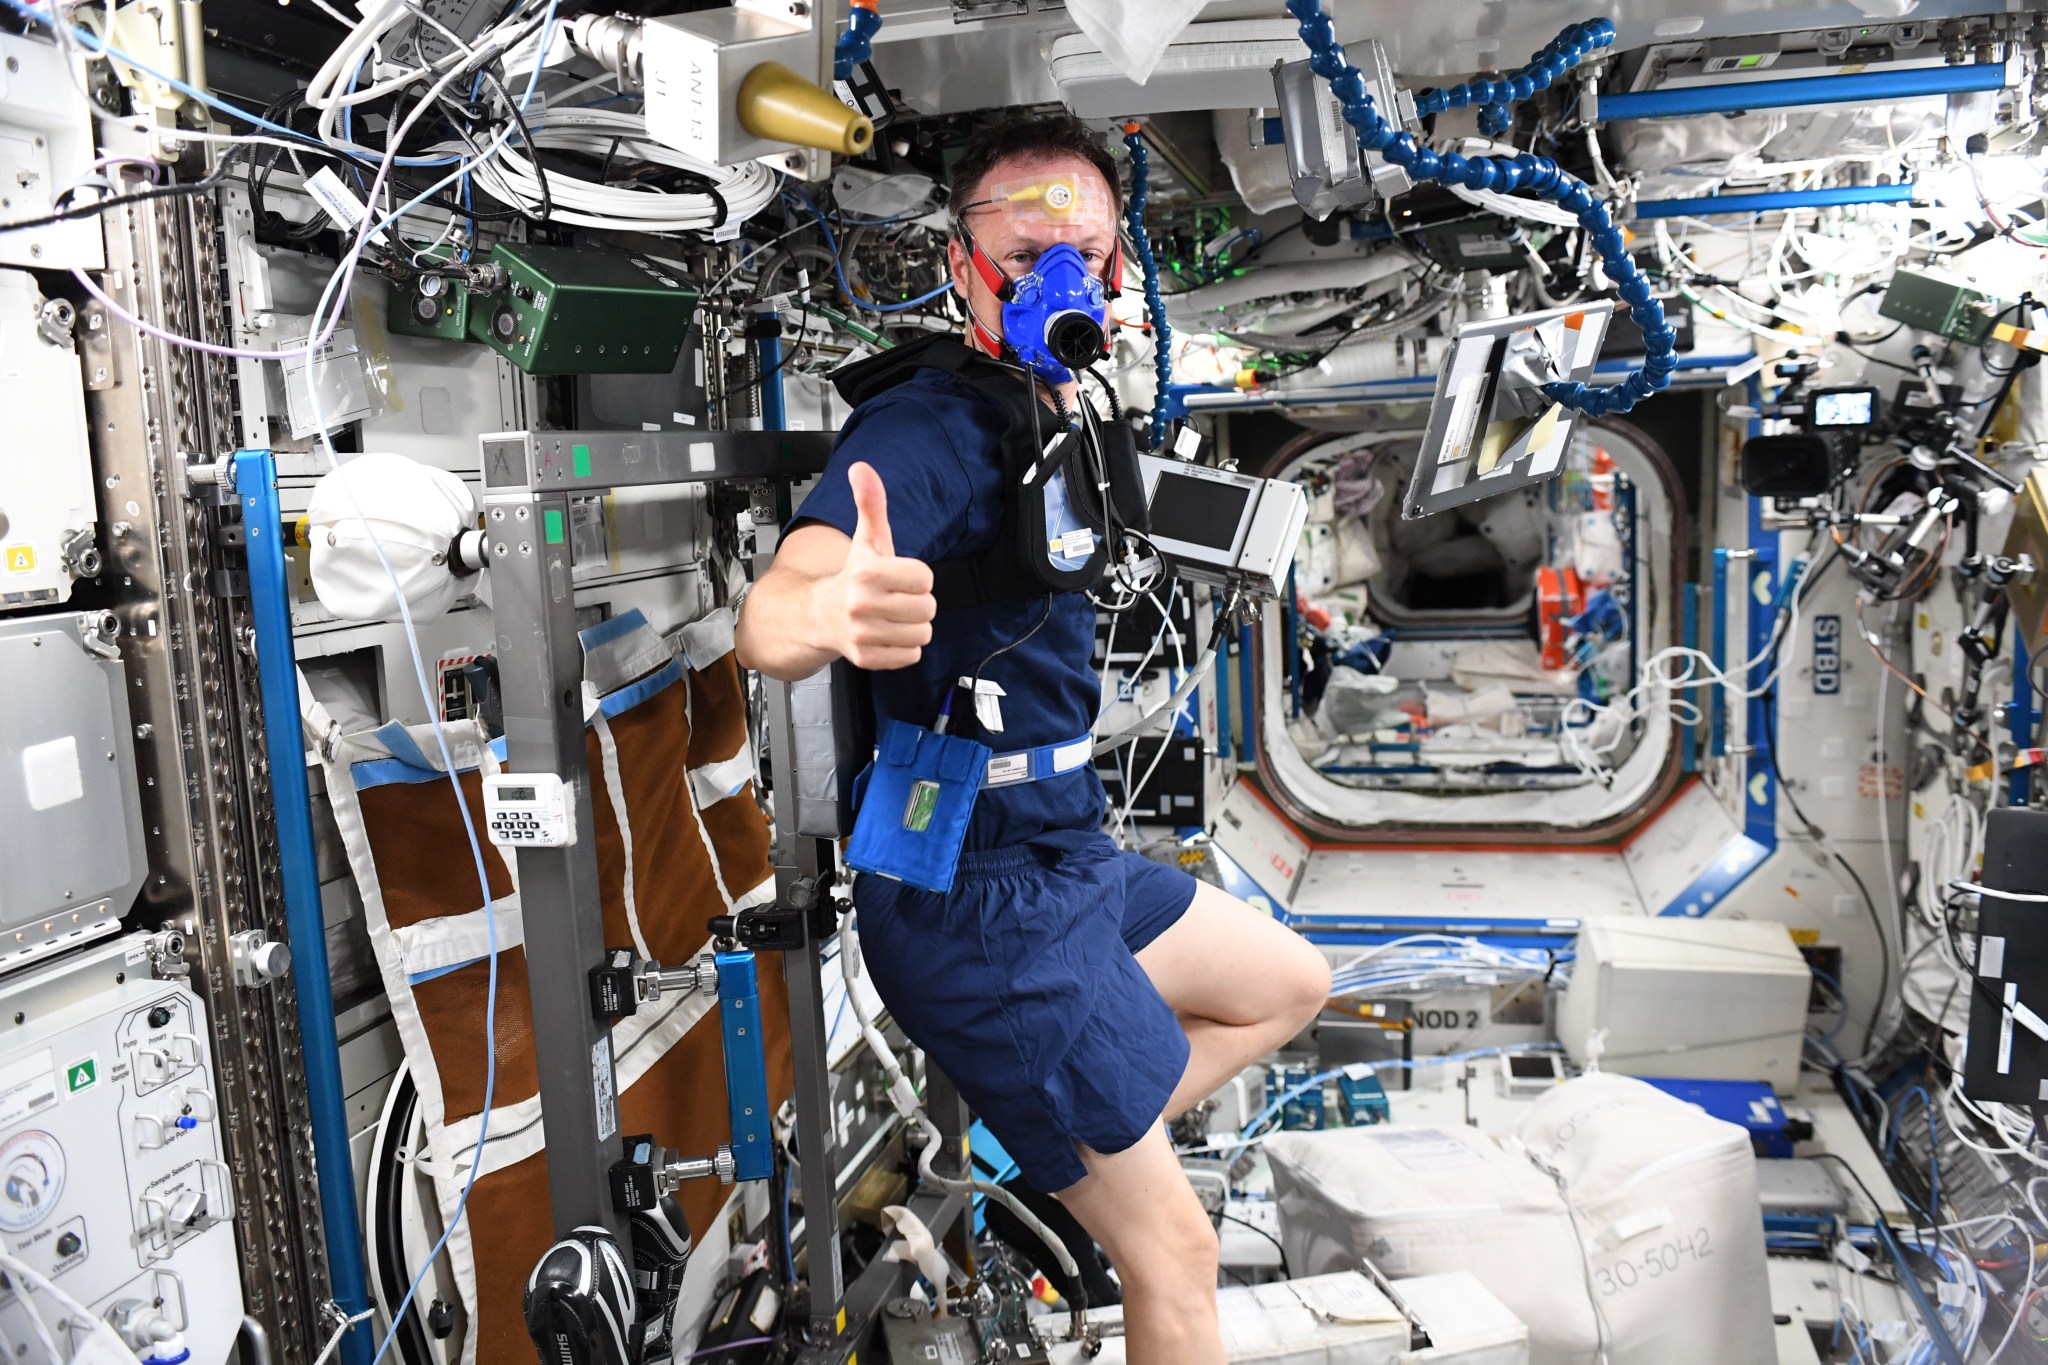 image of an astronaut on an exercise bike 